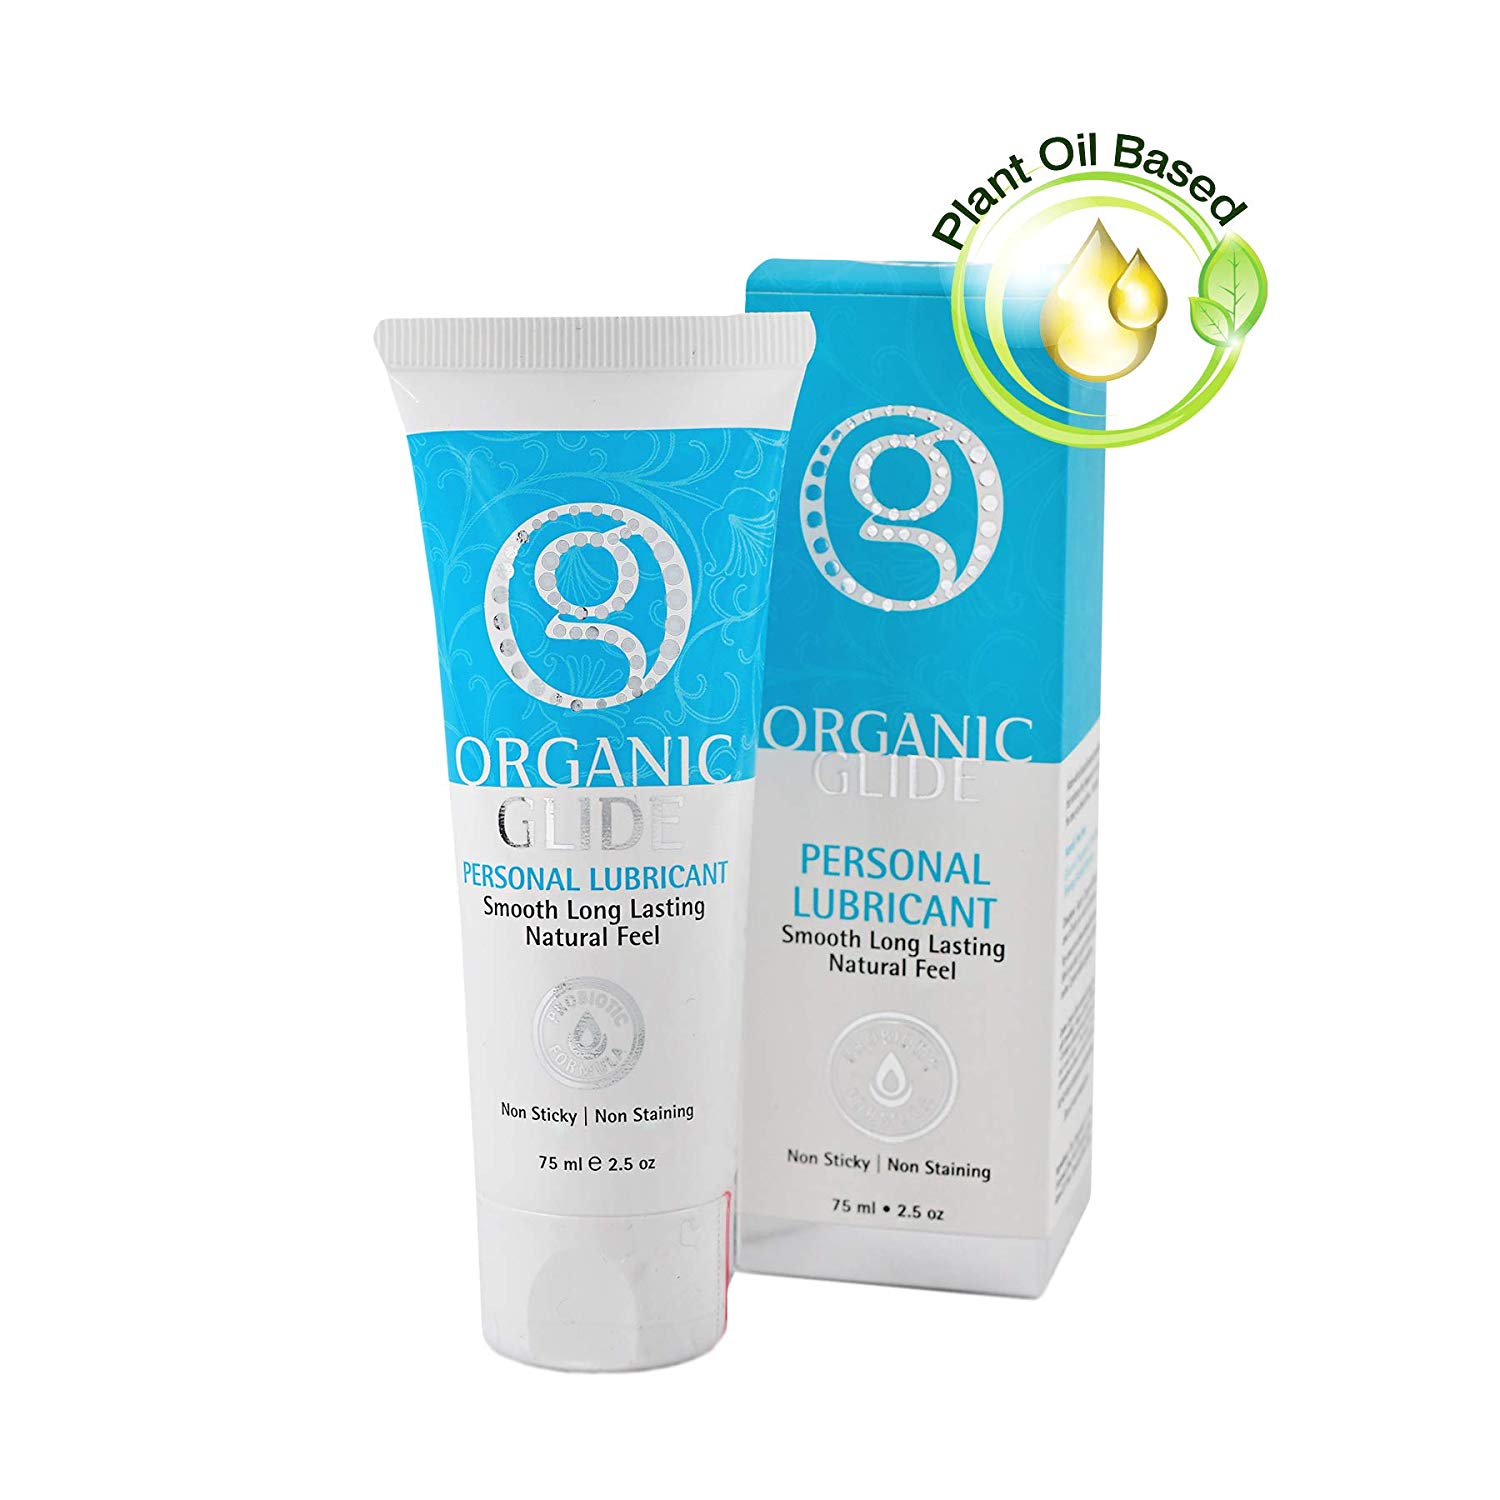 Organic Glide Probiotic All Natural Personal Lubricant 2.5oz Tube, 100% Edible - image 1 of 5